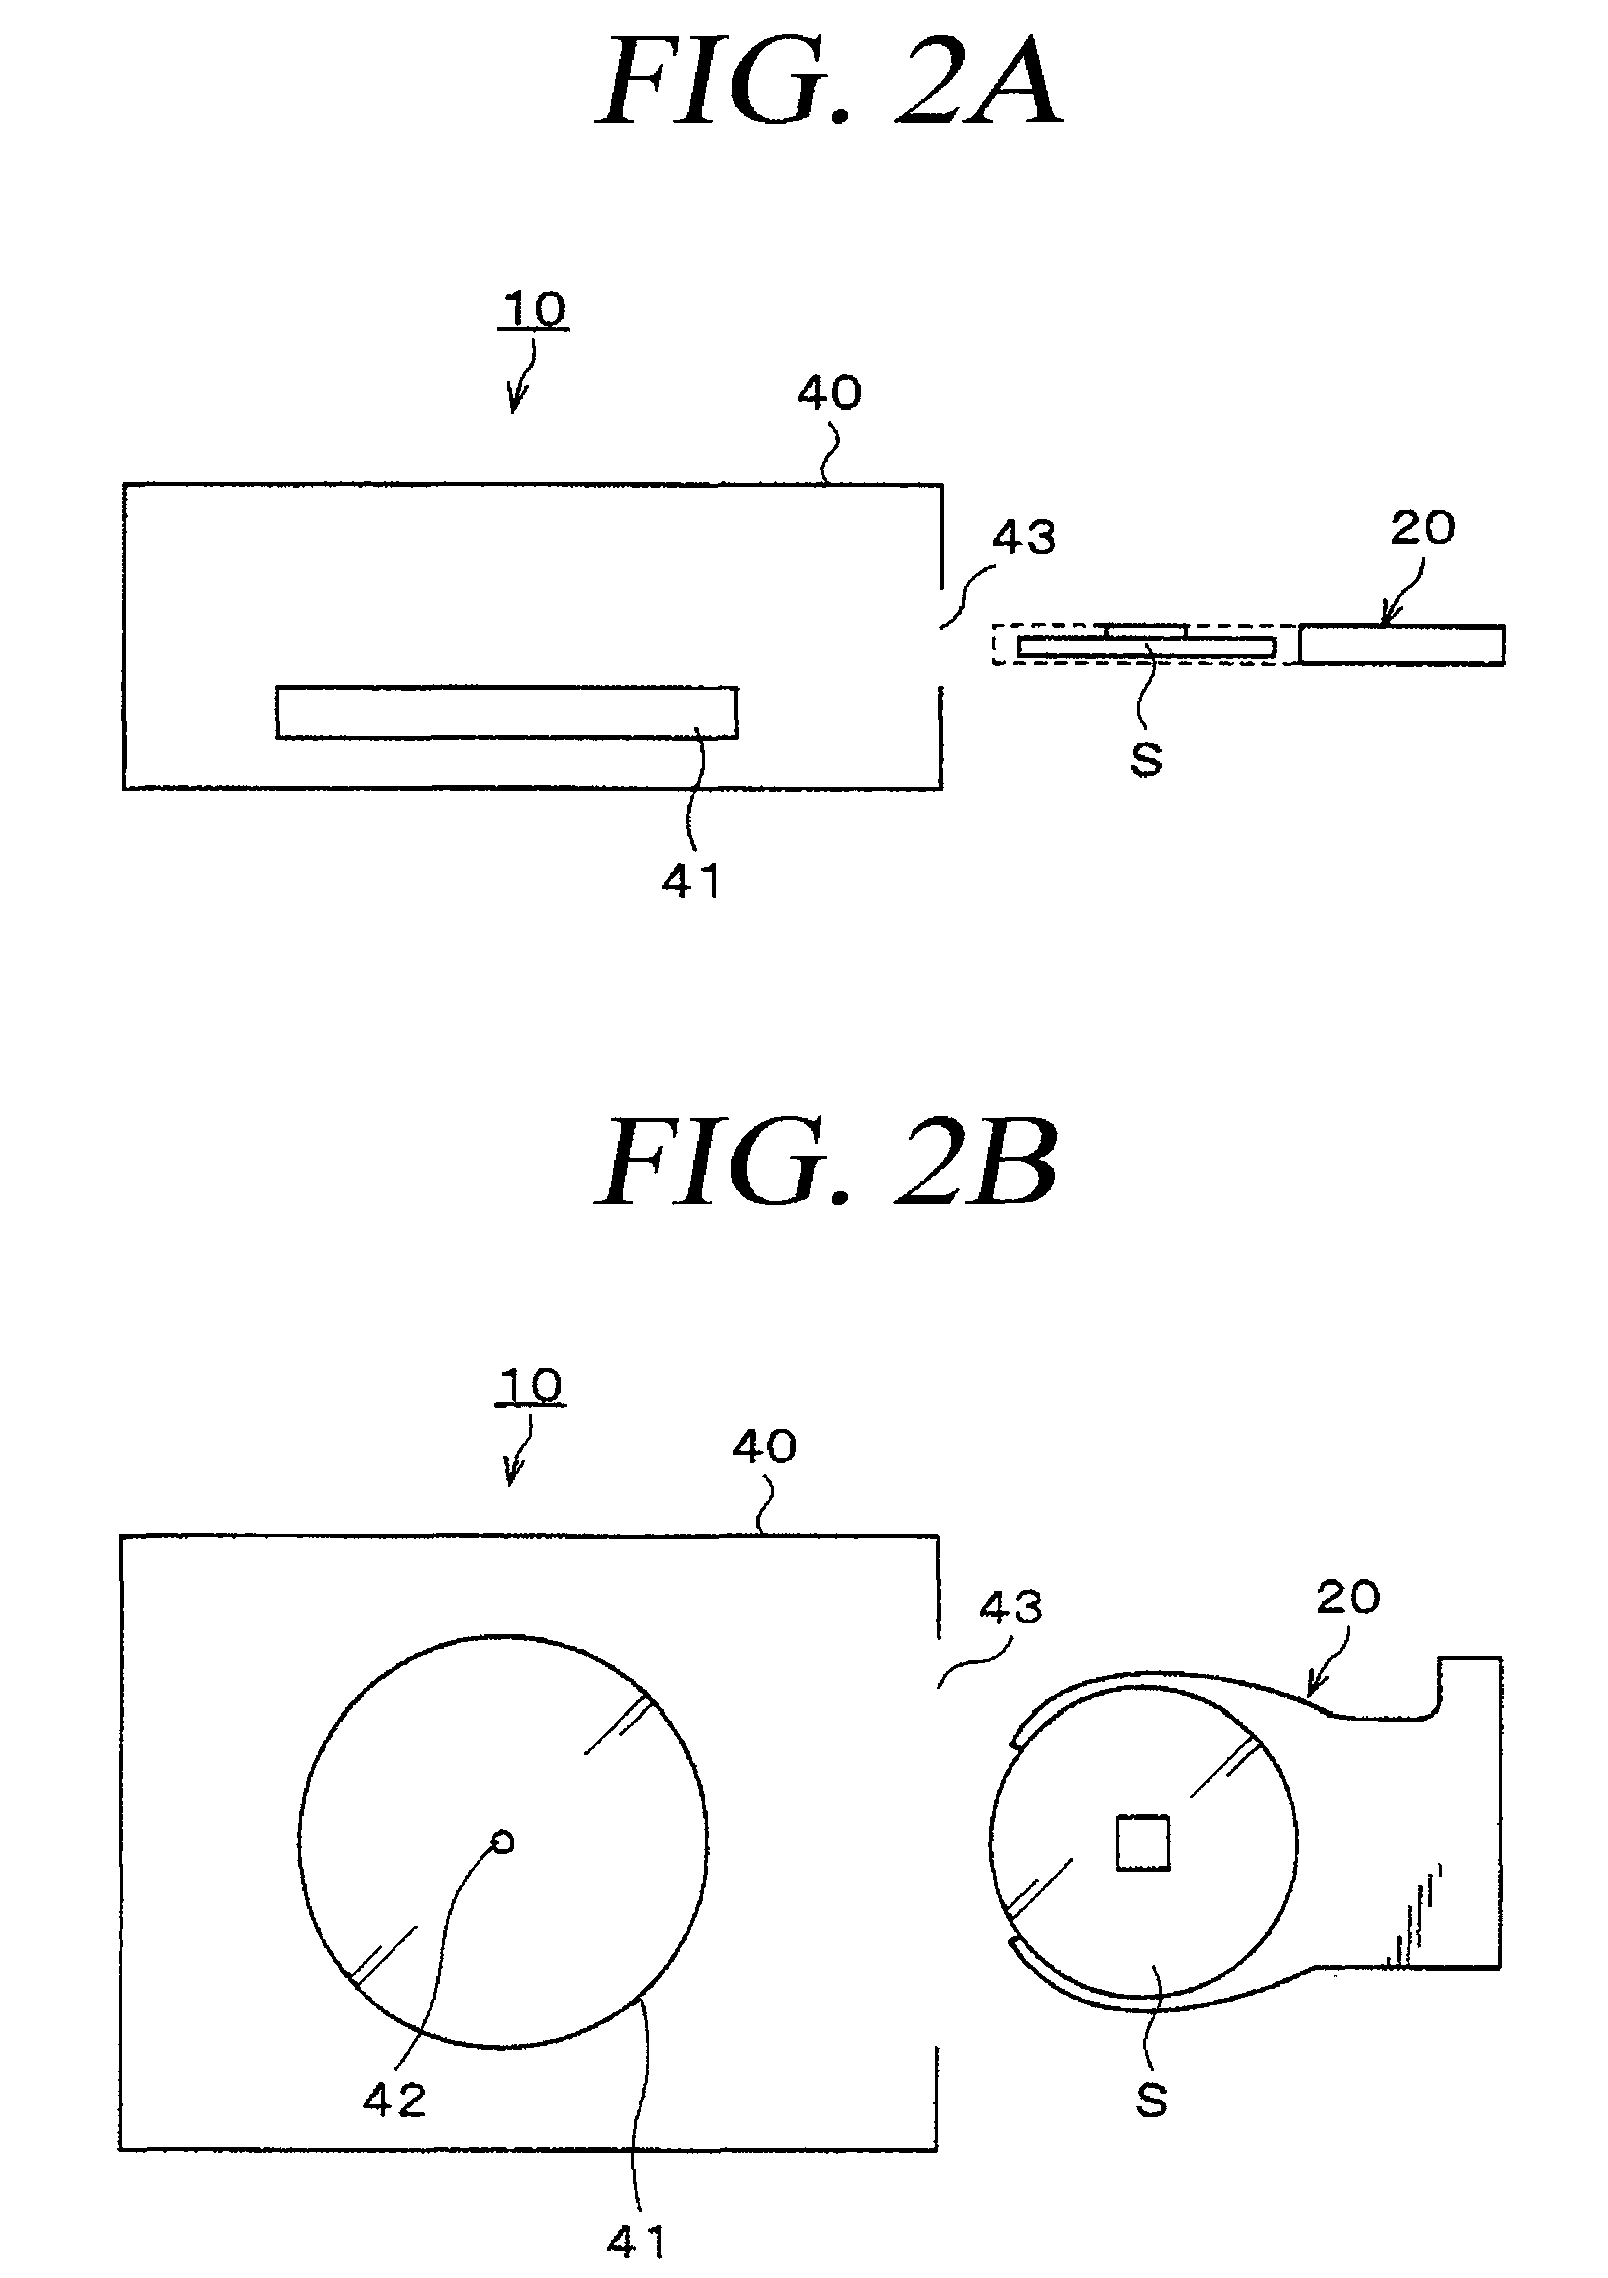 Jig for detecting position